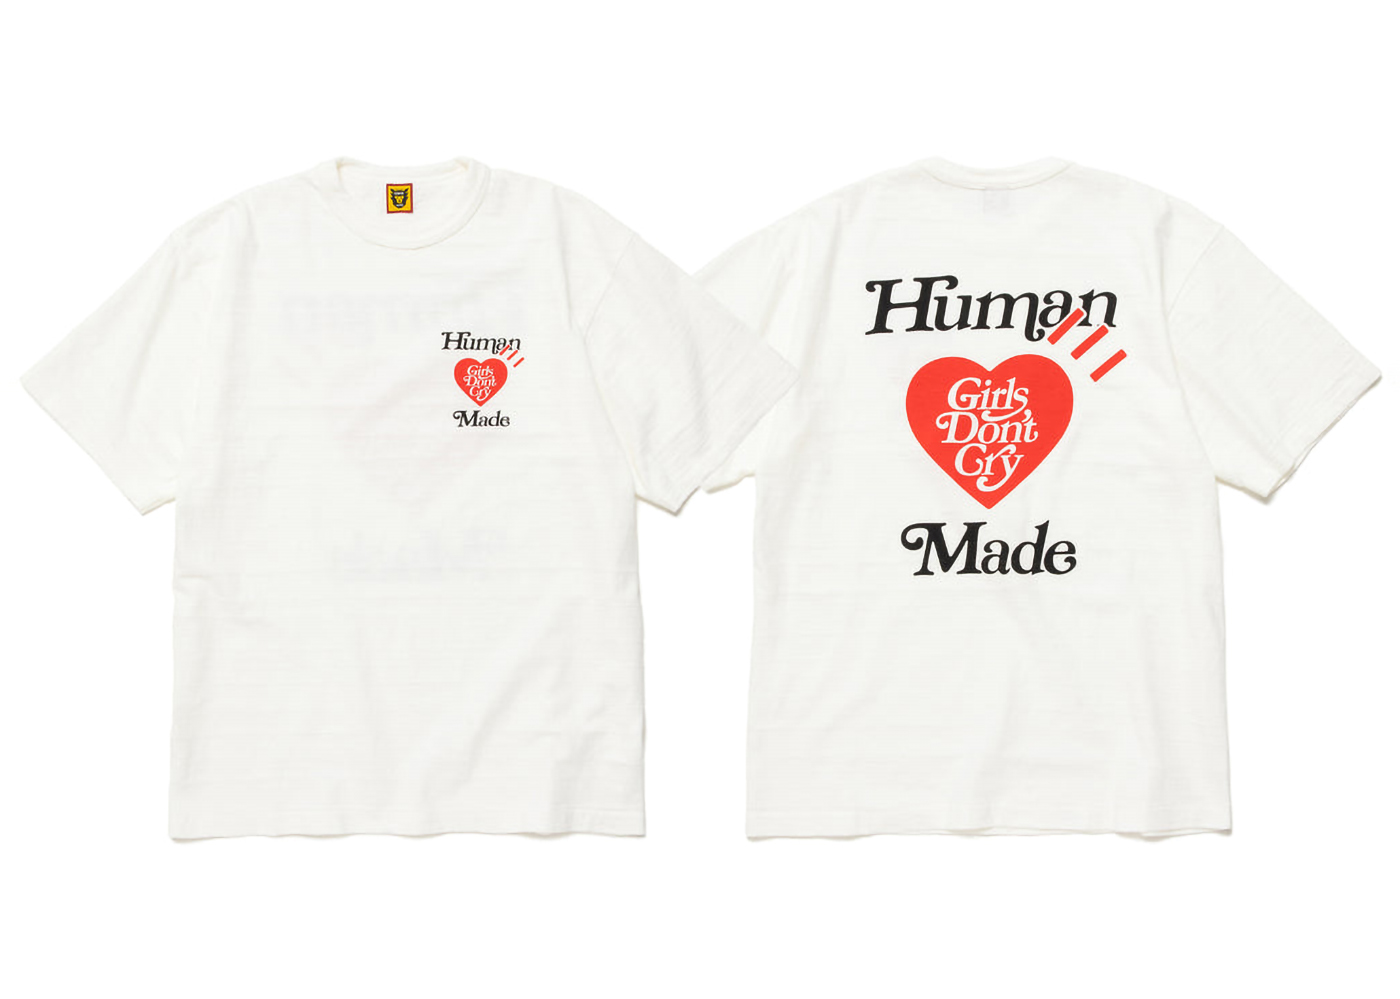 human made girls don't cry Tシャツ - Tシャツ/カットソー(半袖/袖なし)